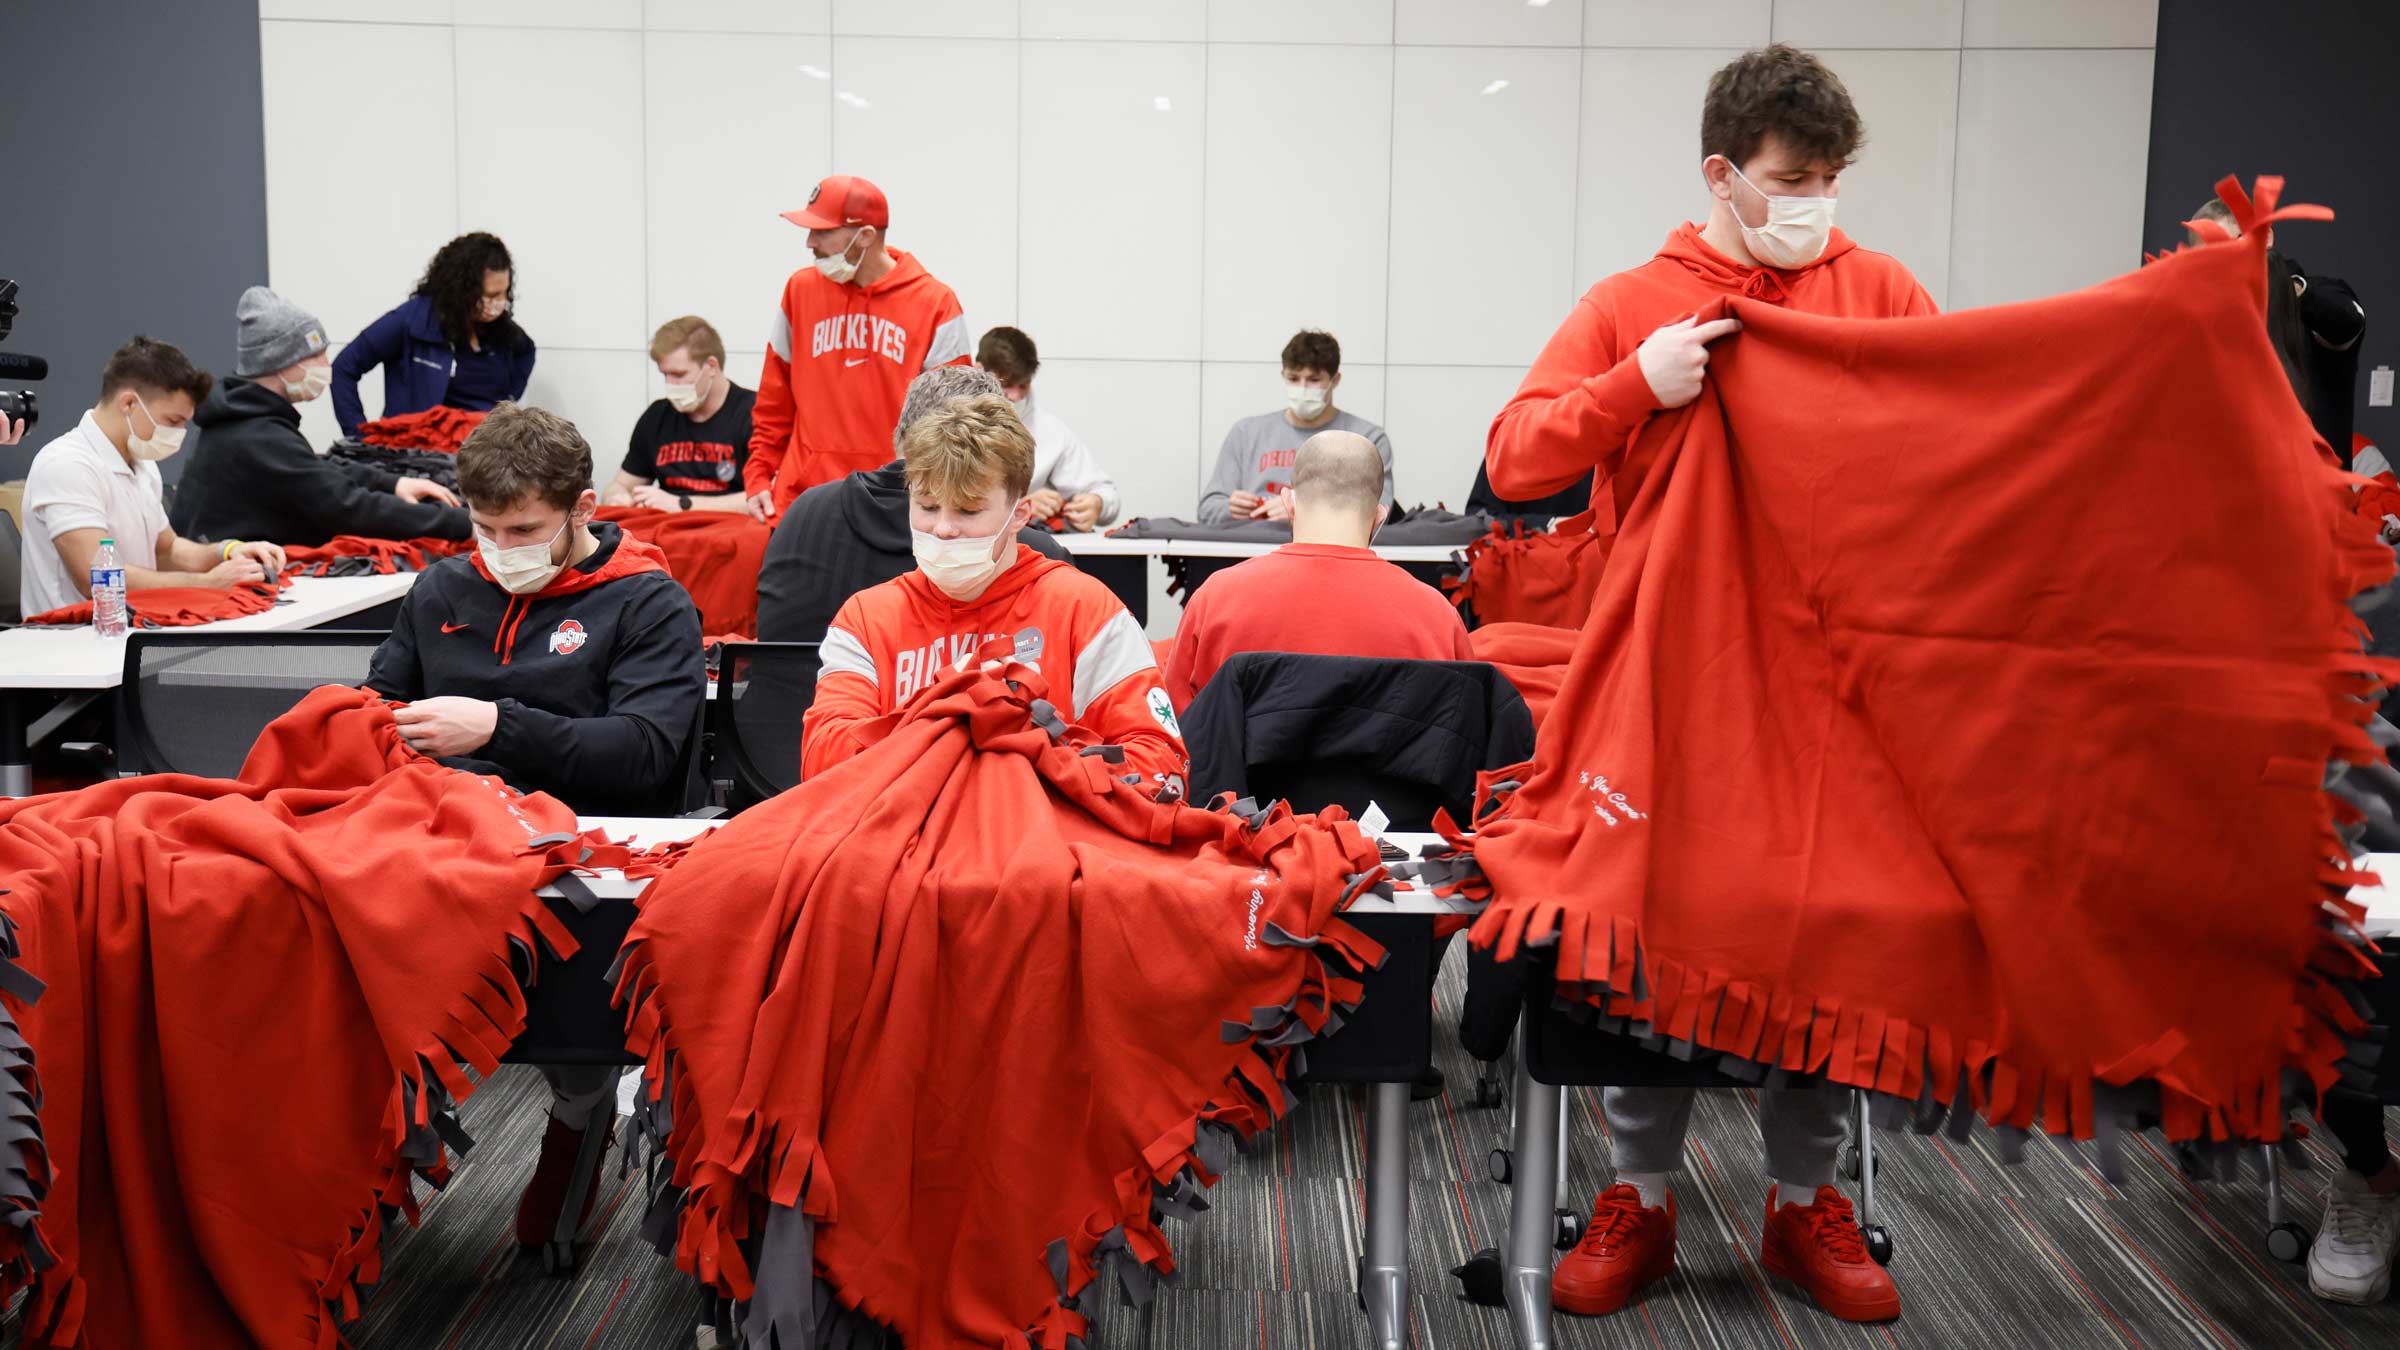 Nic Bouzakis was joined by nearly 30 members of The Ohio State University wrestling team to make blankets.